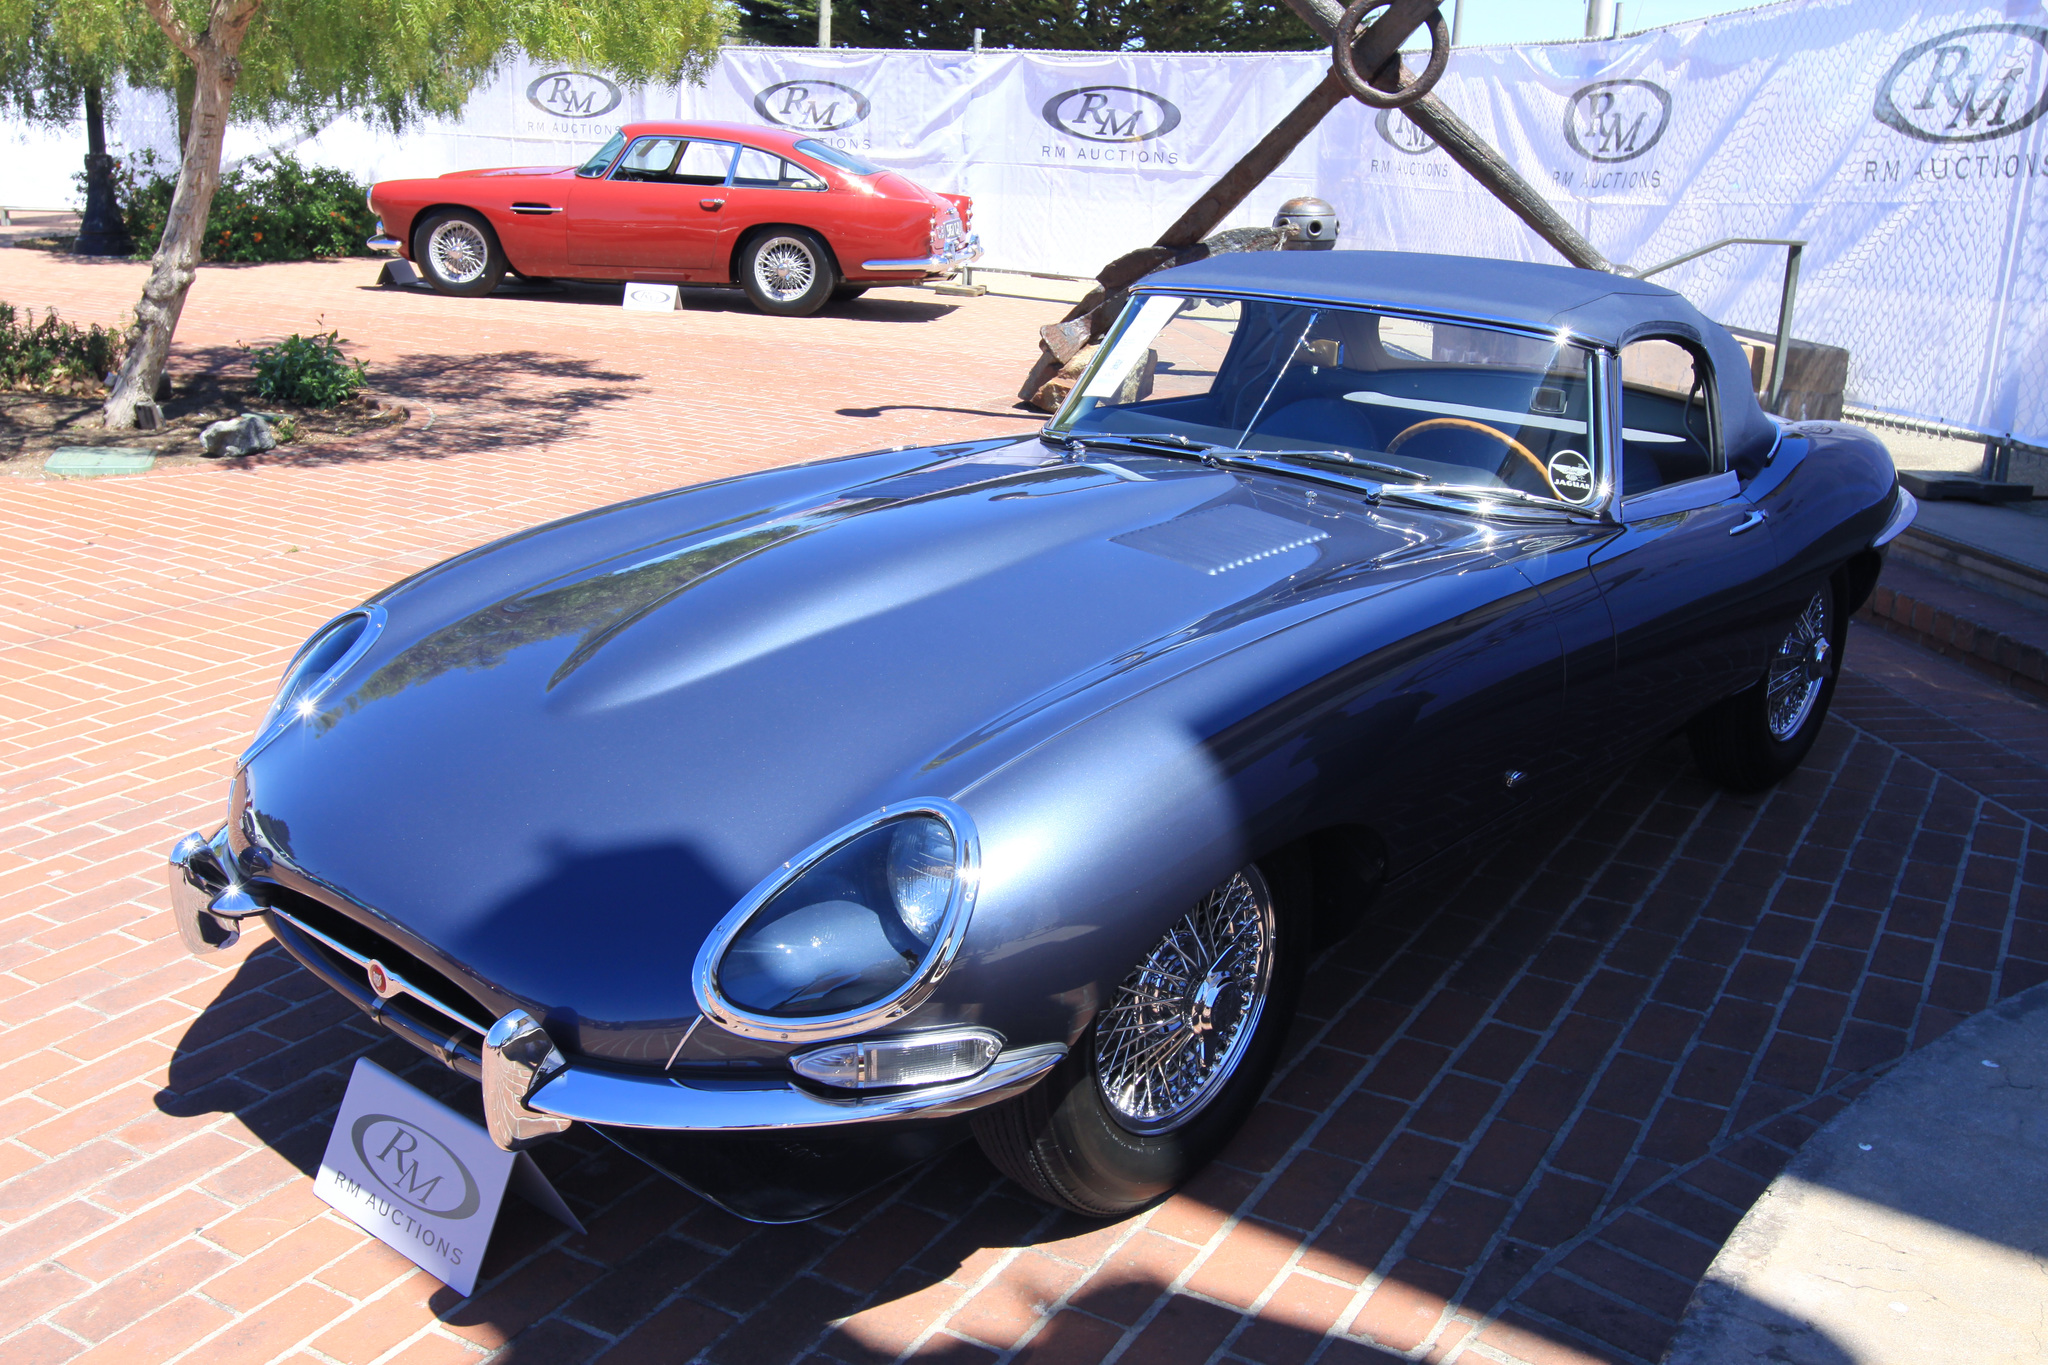 1961 Jaguar E-Type 3.8-Litre Roadster 875331 - sold for $440,000 at RM Auctions. Early outside-bonnet latch, flat-floor, welded-louver Series 1. Received 100 points at the 2014 JCNA Concours and a First in Class at the 2014 San Marino Classic Concours. Tremendous preservation of its original sheet metal and mechanicals. Documented as matching-numbers engine and transmission by JDHT.